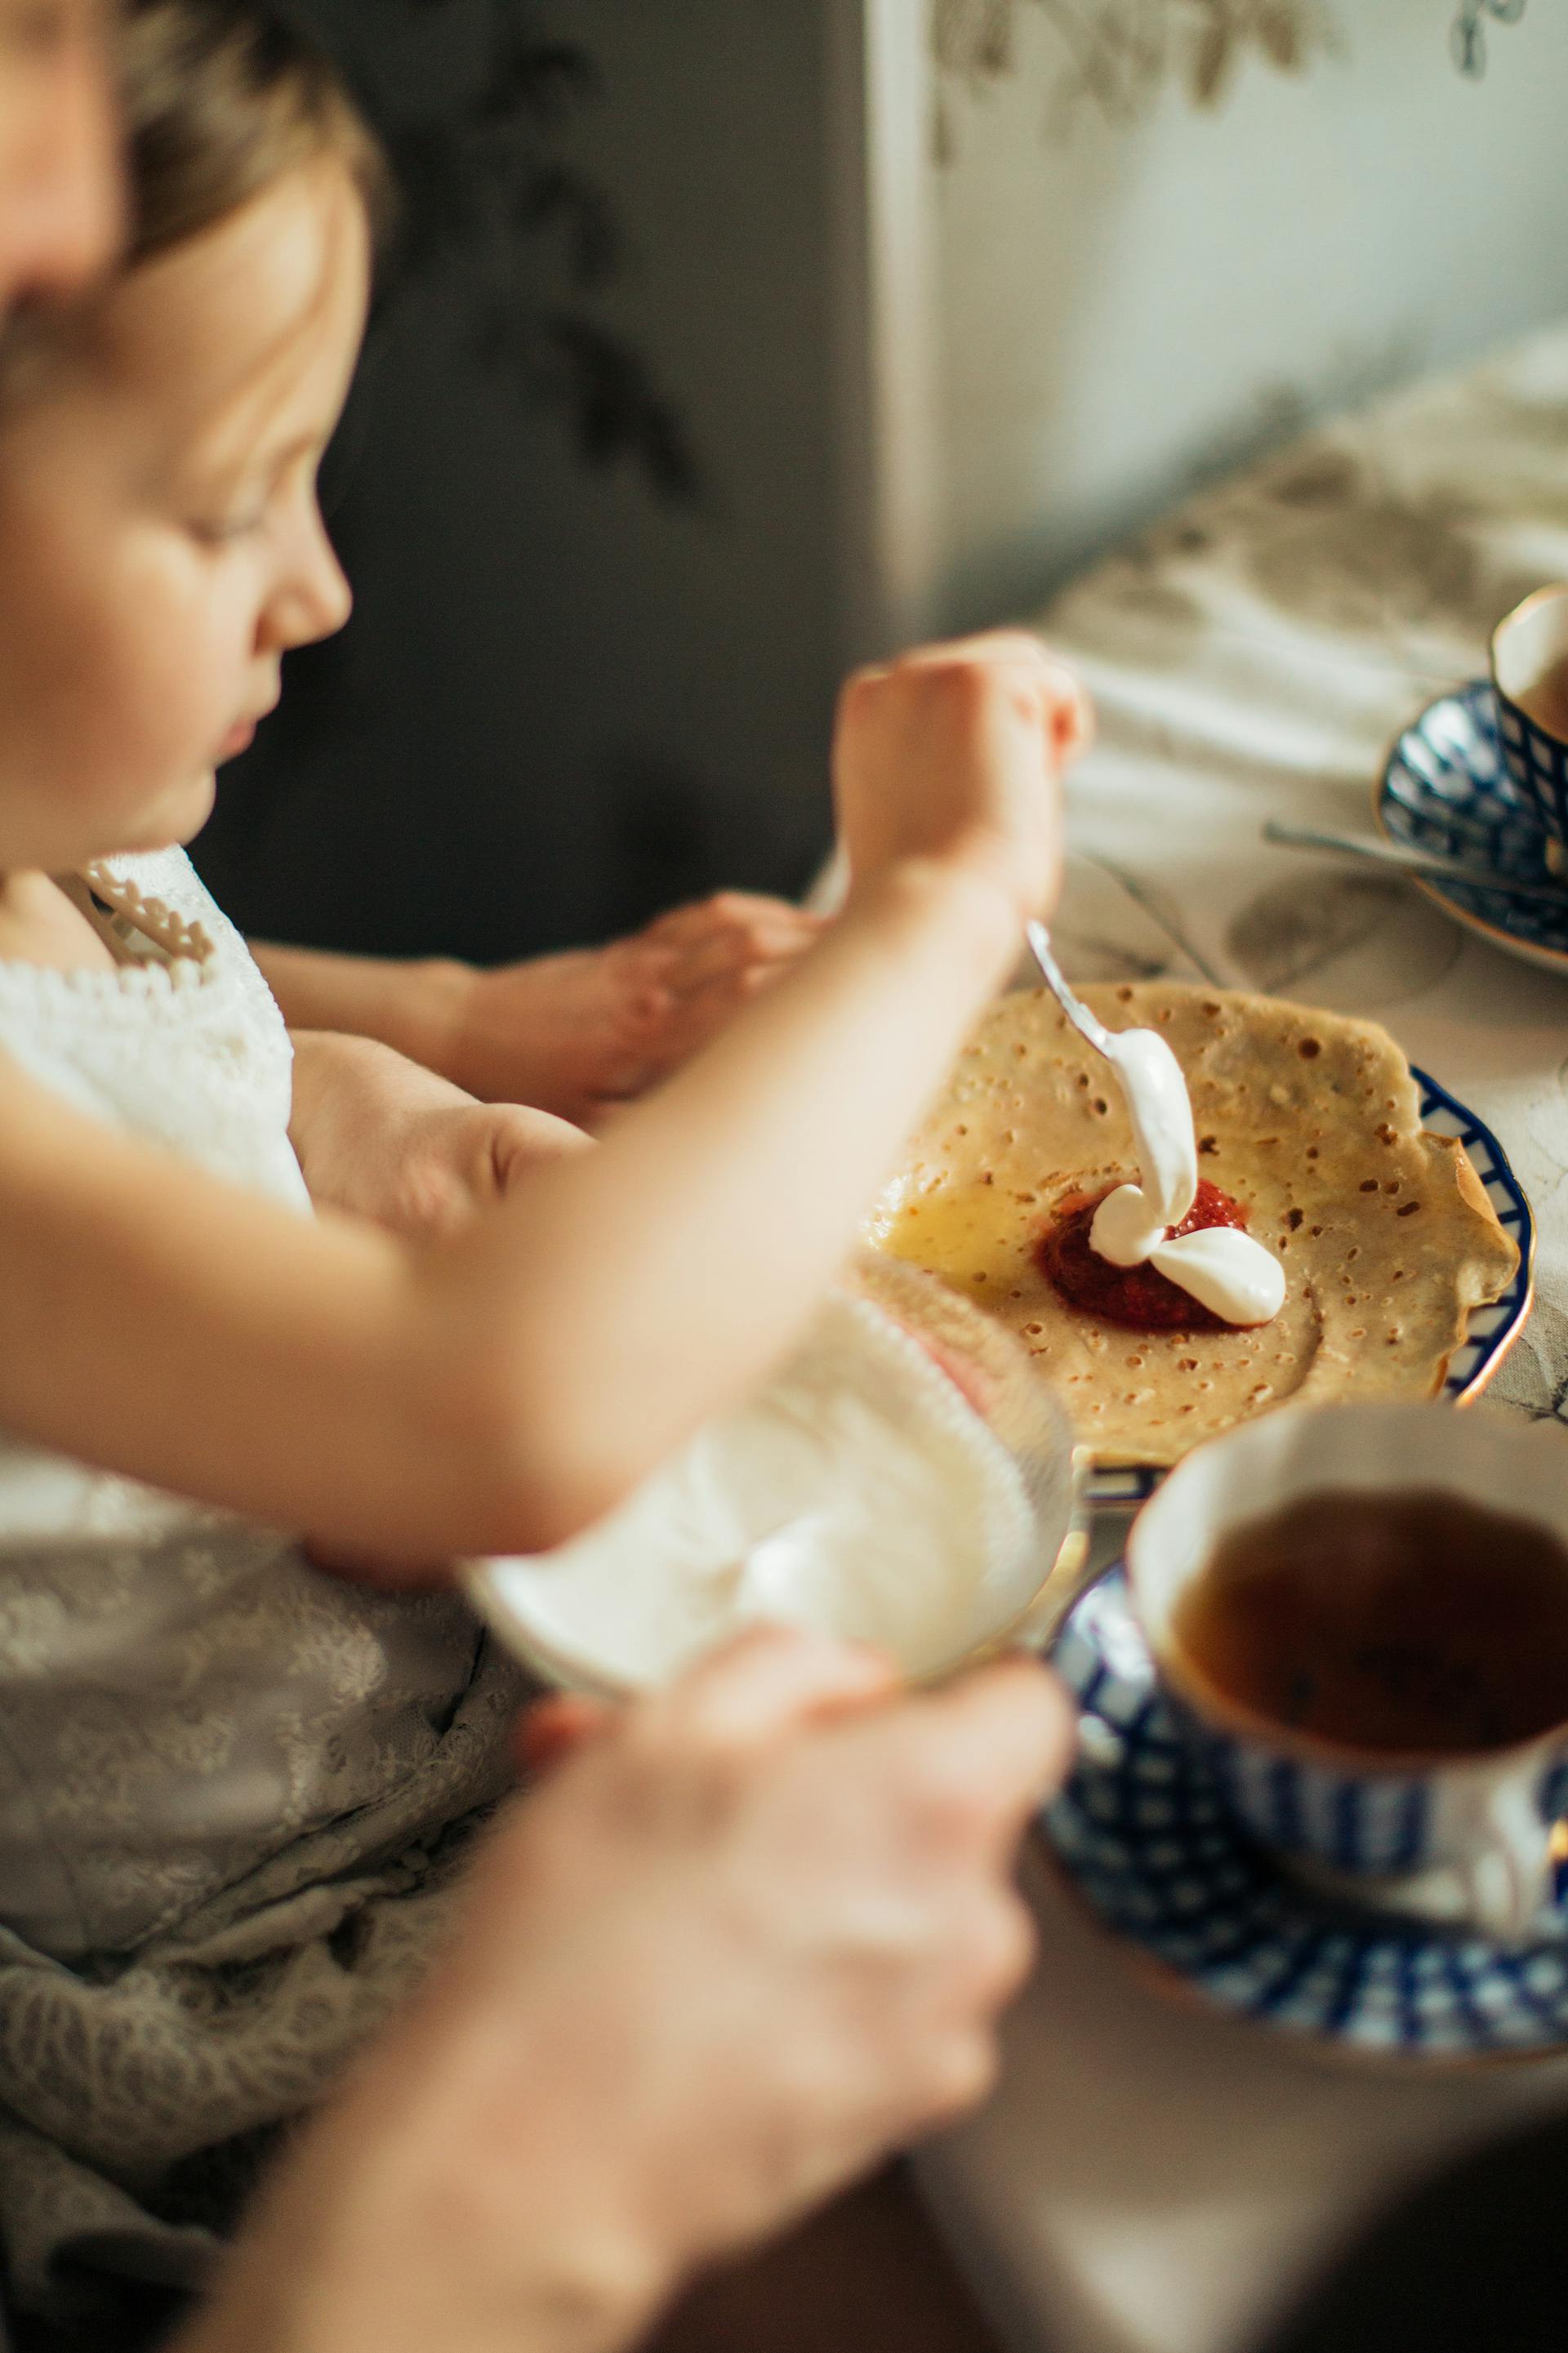 A young girl spreading jam and cream on crepe | Source: Pexels